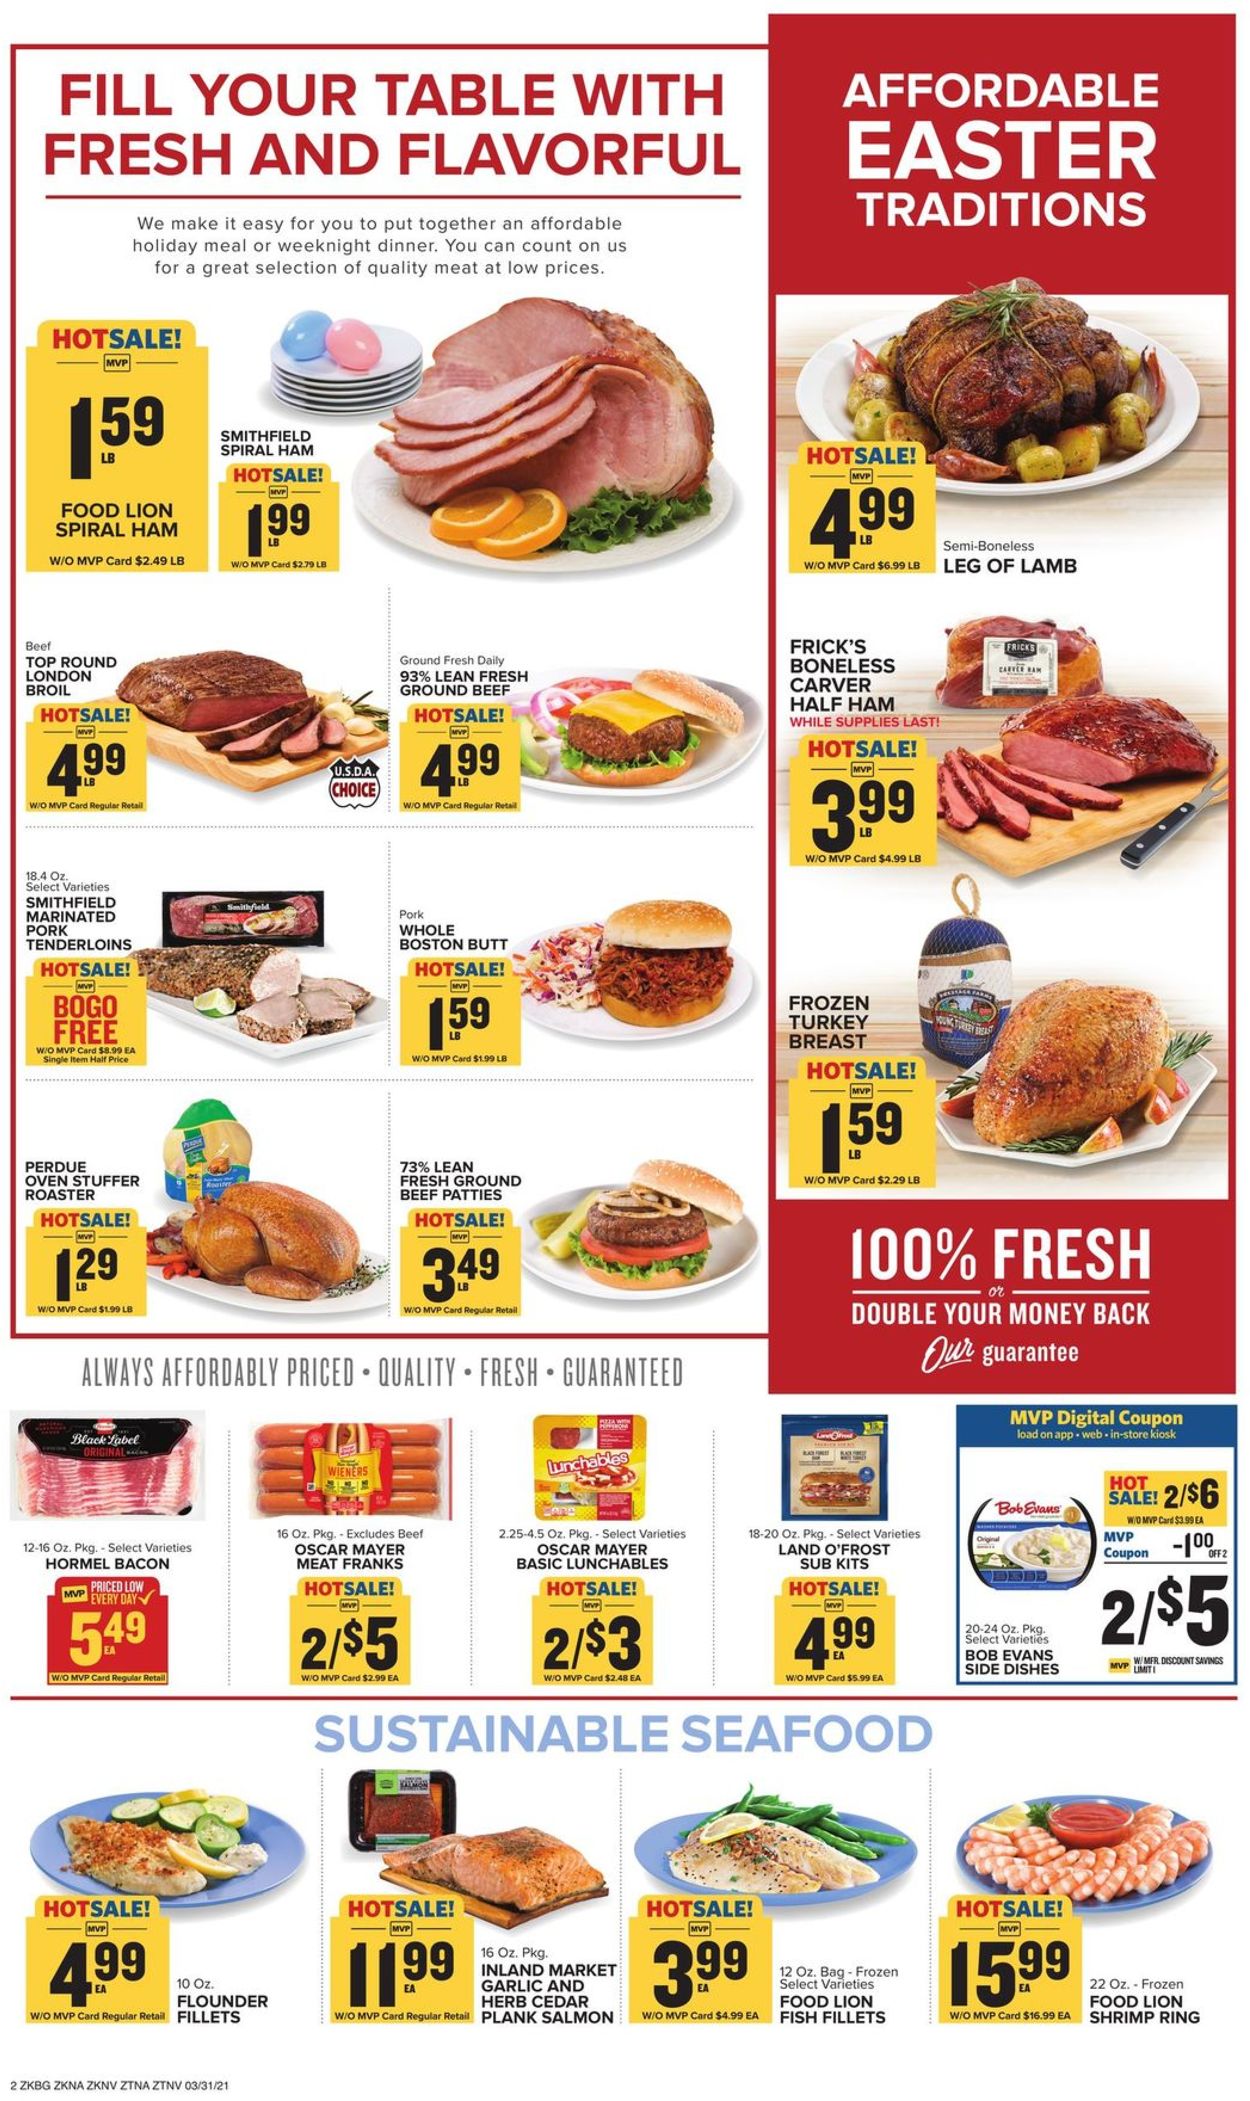 Food Lion Easter 2021 ad Current weekly ad 03/31 04/06/2021 [3